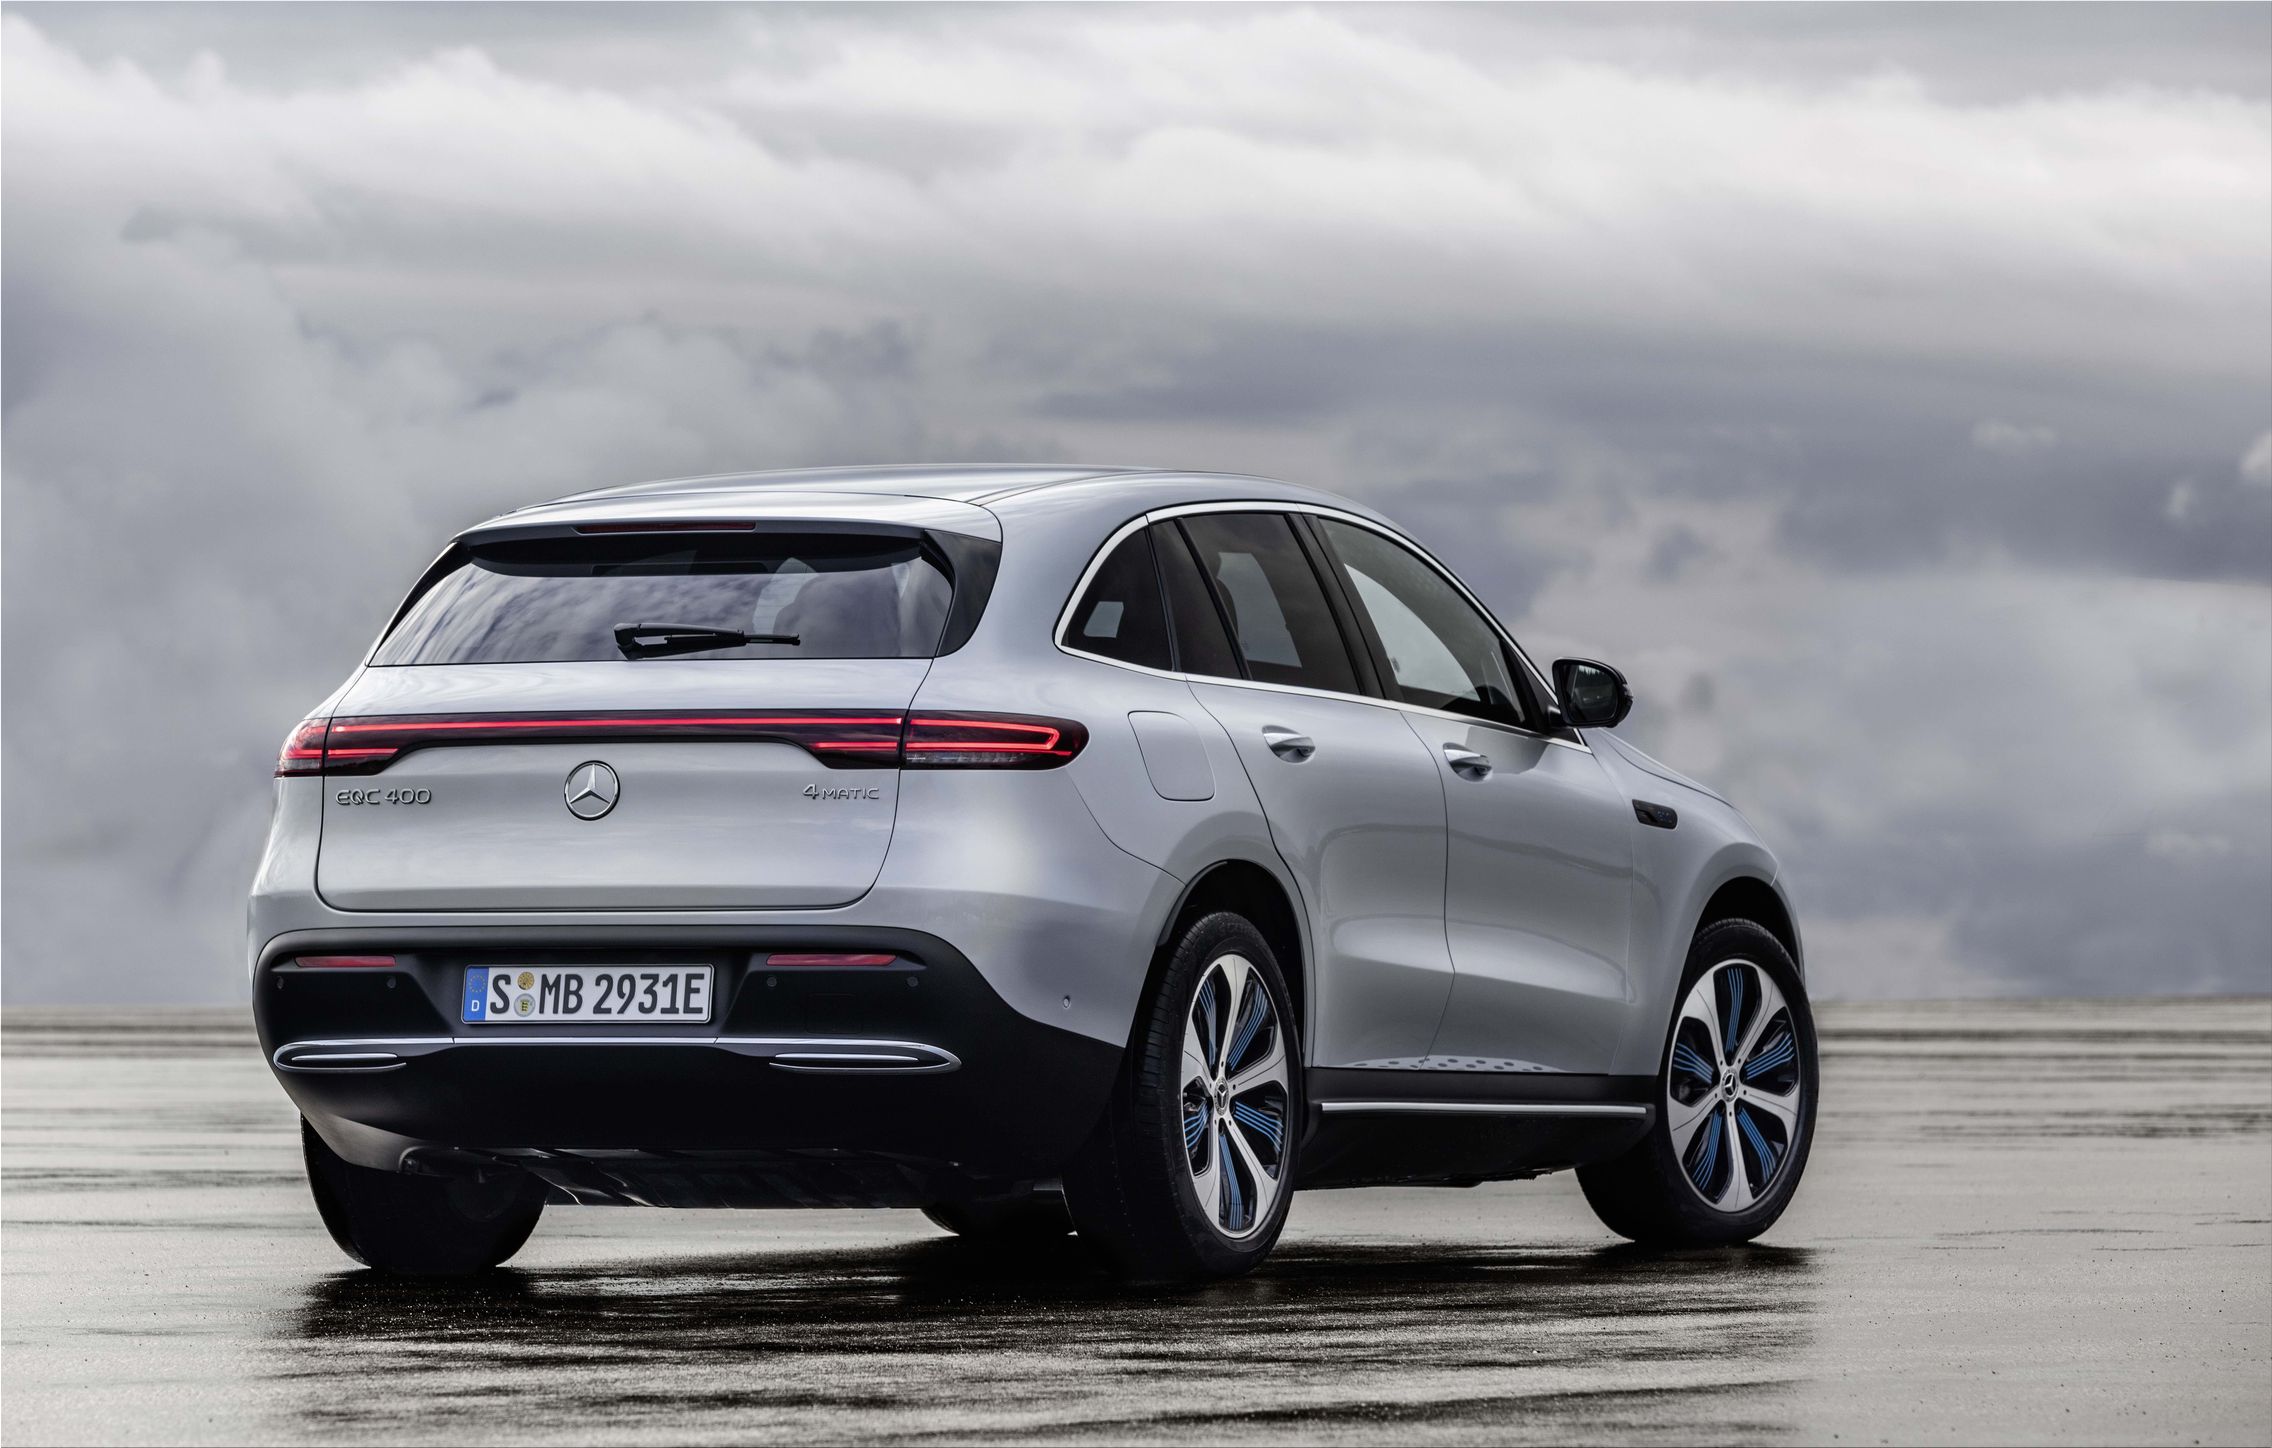 New Mercedes EQC 2019 Prices Of The Electric SUV From Daimler EQ